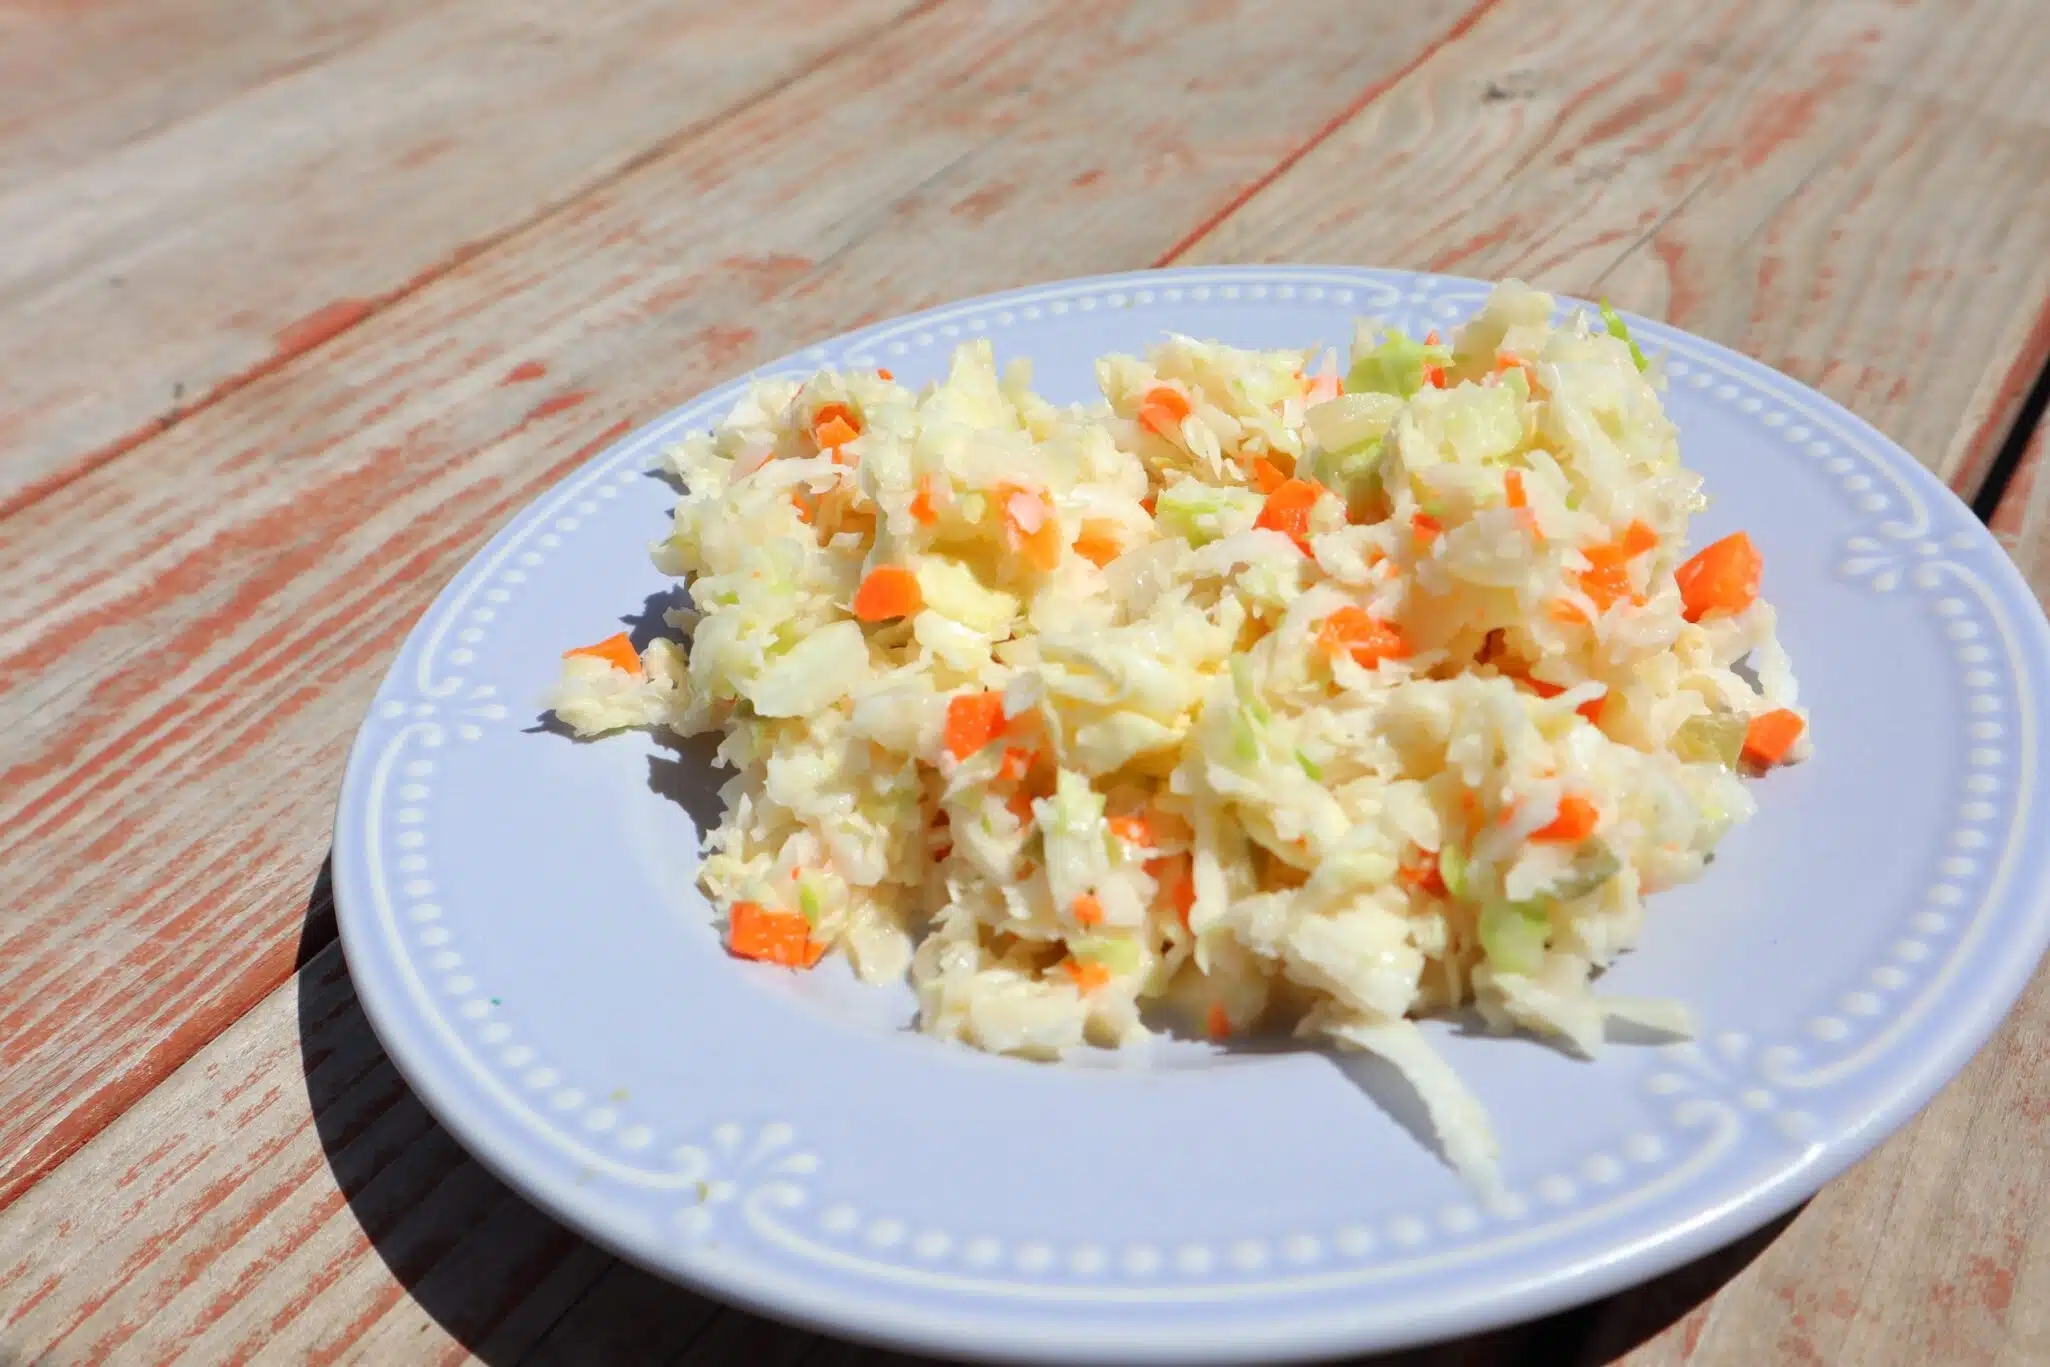 How to Make Homemade Coleslaw